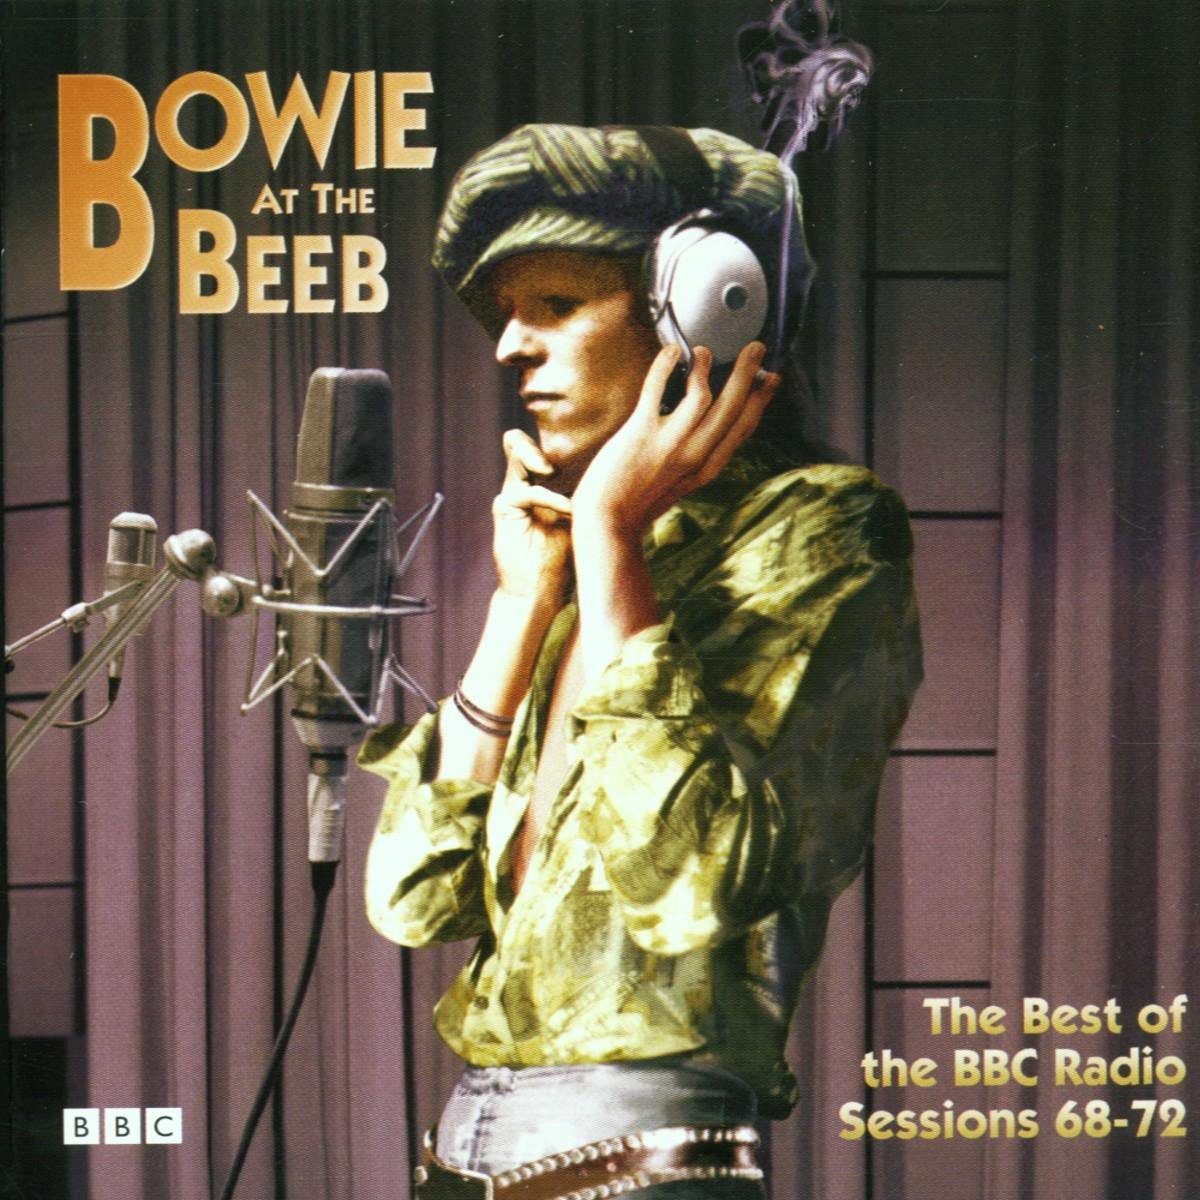 Bowie At The Beeb: The Best Of The BBC Radio Sessions 68-72, David Bowie |  CD (album)... | bol.com